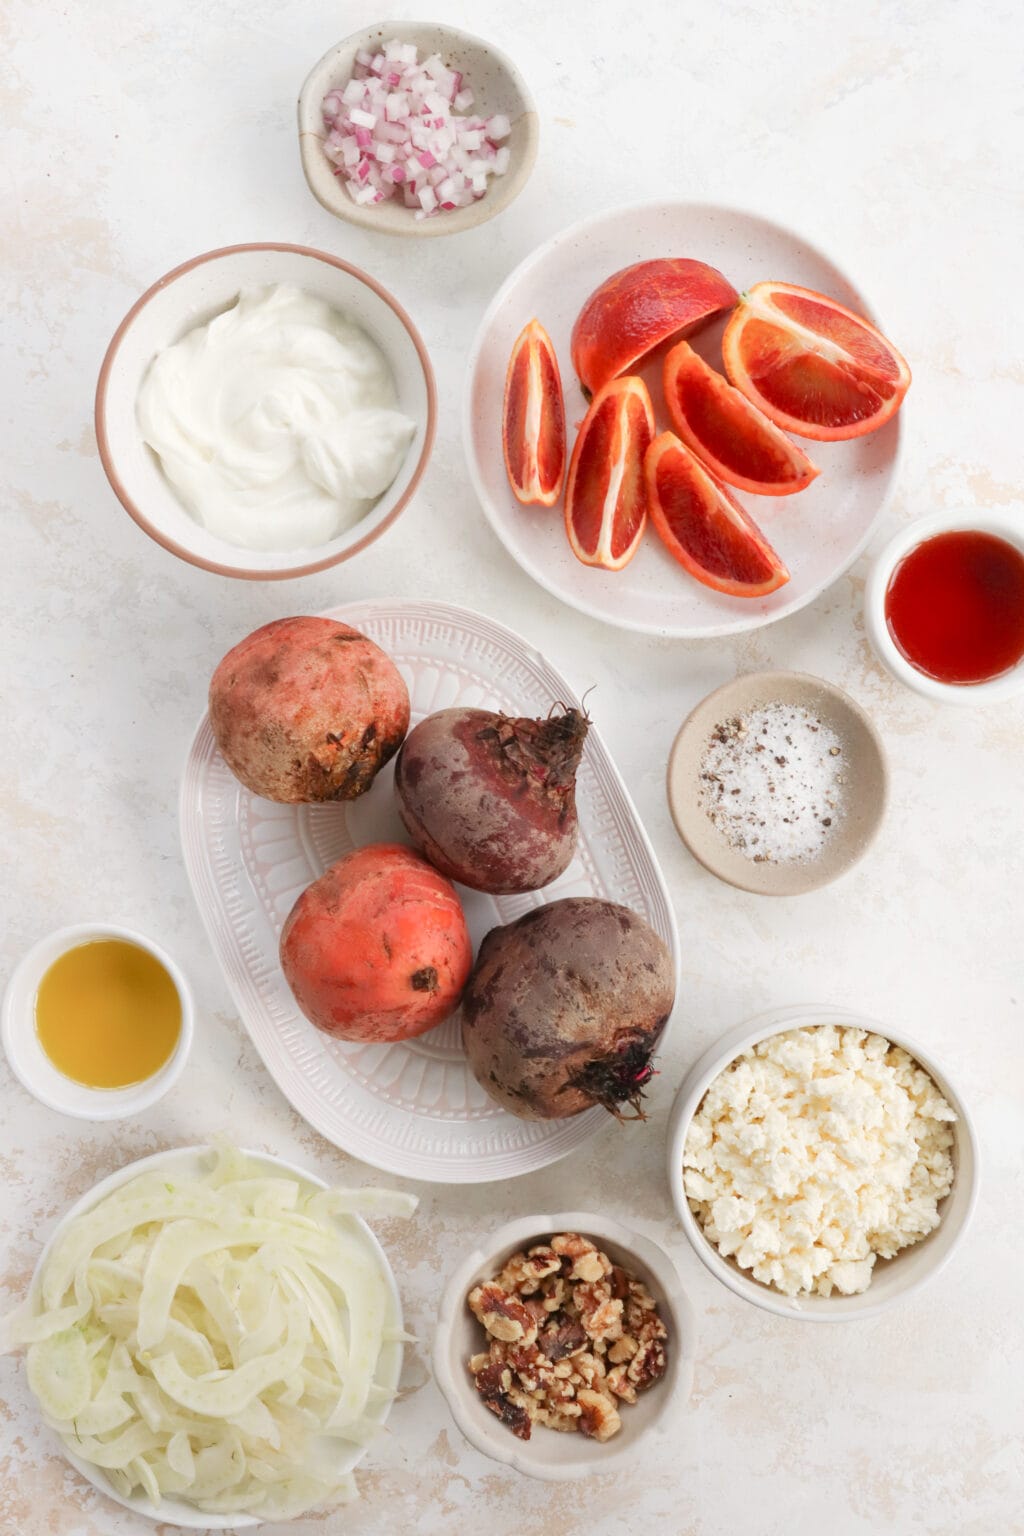 Ingredients for Blood Orange & Roasted Beet Salad with Creamy Yogurt Dressing, including Greek yogurt, feta cheese, beets and golden beets, avocado oil,
blood oranges, extra-virgin olive oil, salt and pepper, fennel, shallot, red wine vinegar, mint, toasted walnuts, and honey
